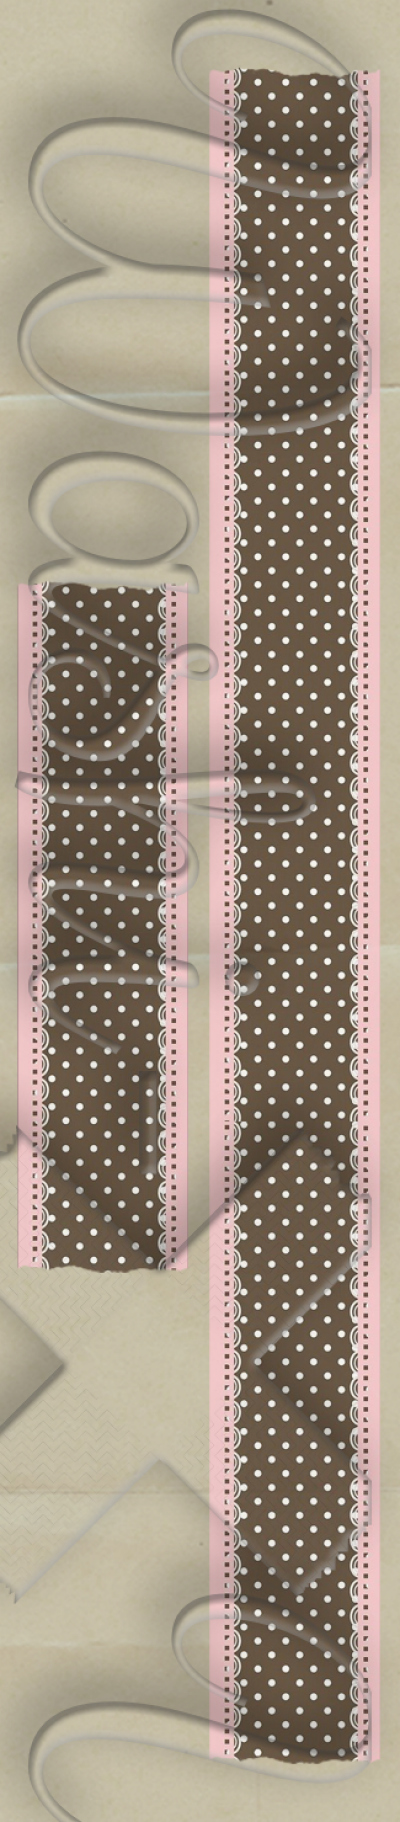 Washi-X Washi Tape Brown-pink dots with embroidery patterned washi tape